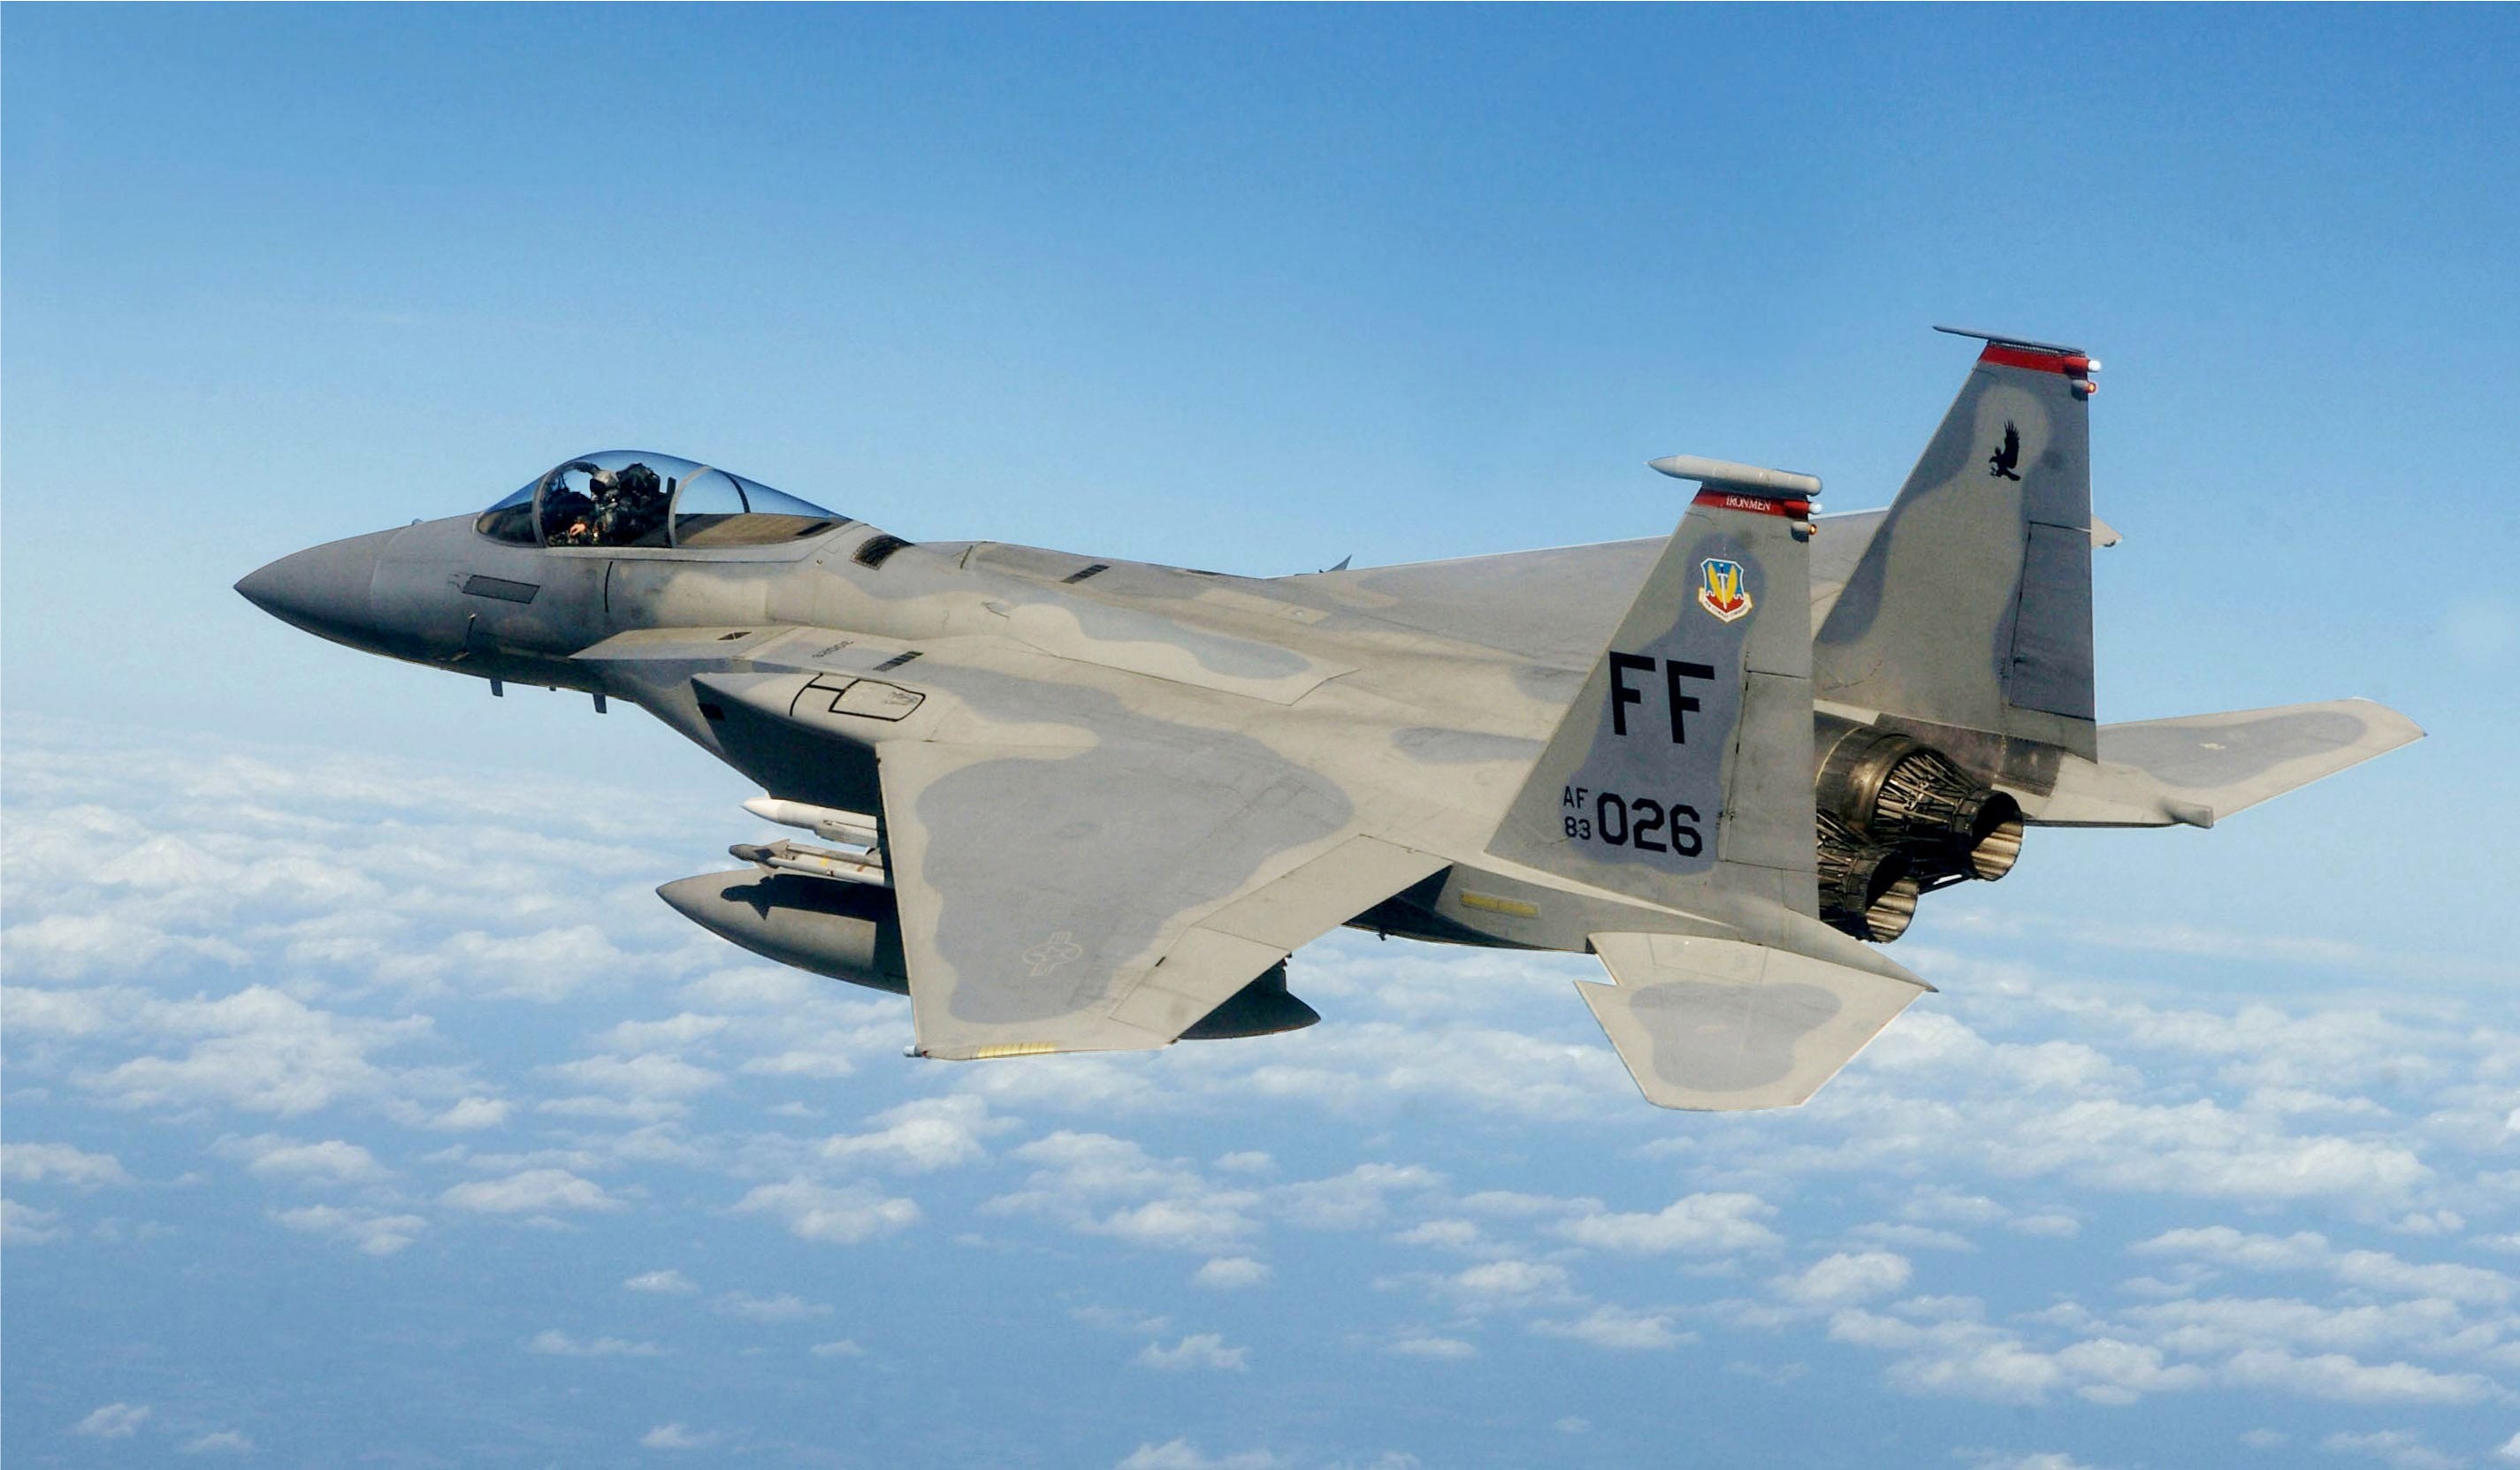 Fighter Jets Over Parsippany Confirmed | Parsippany Focus